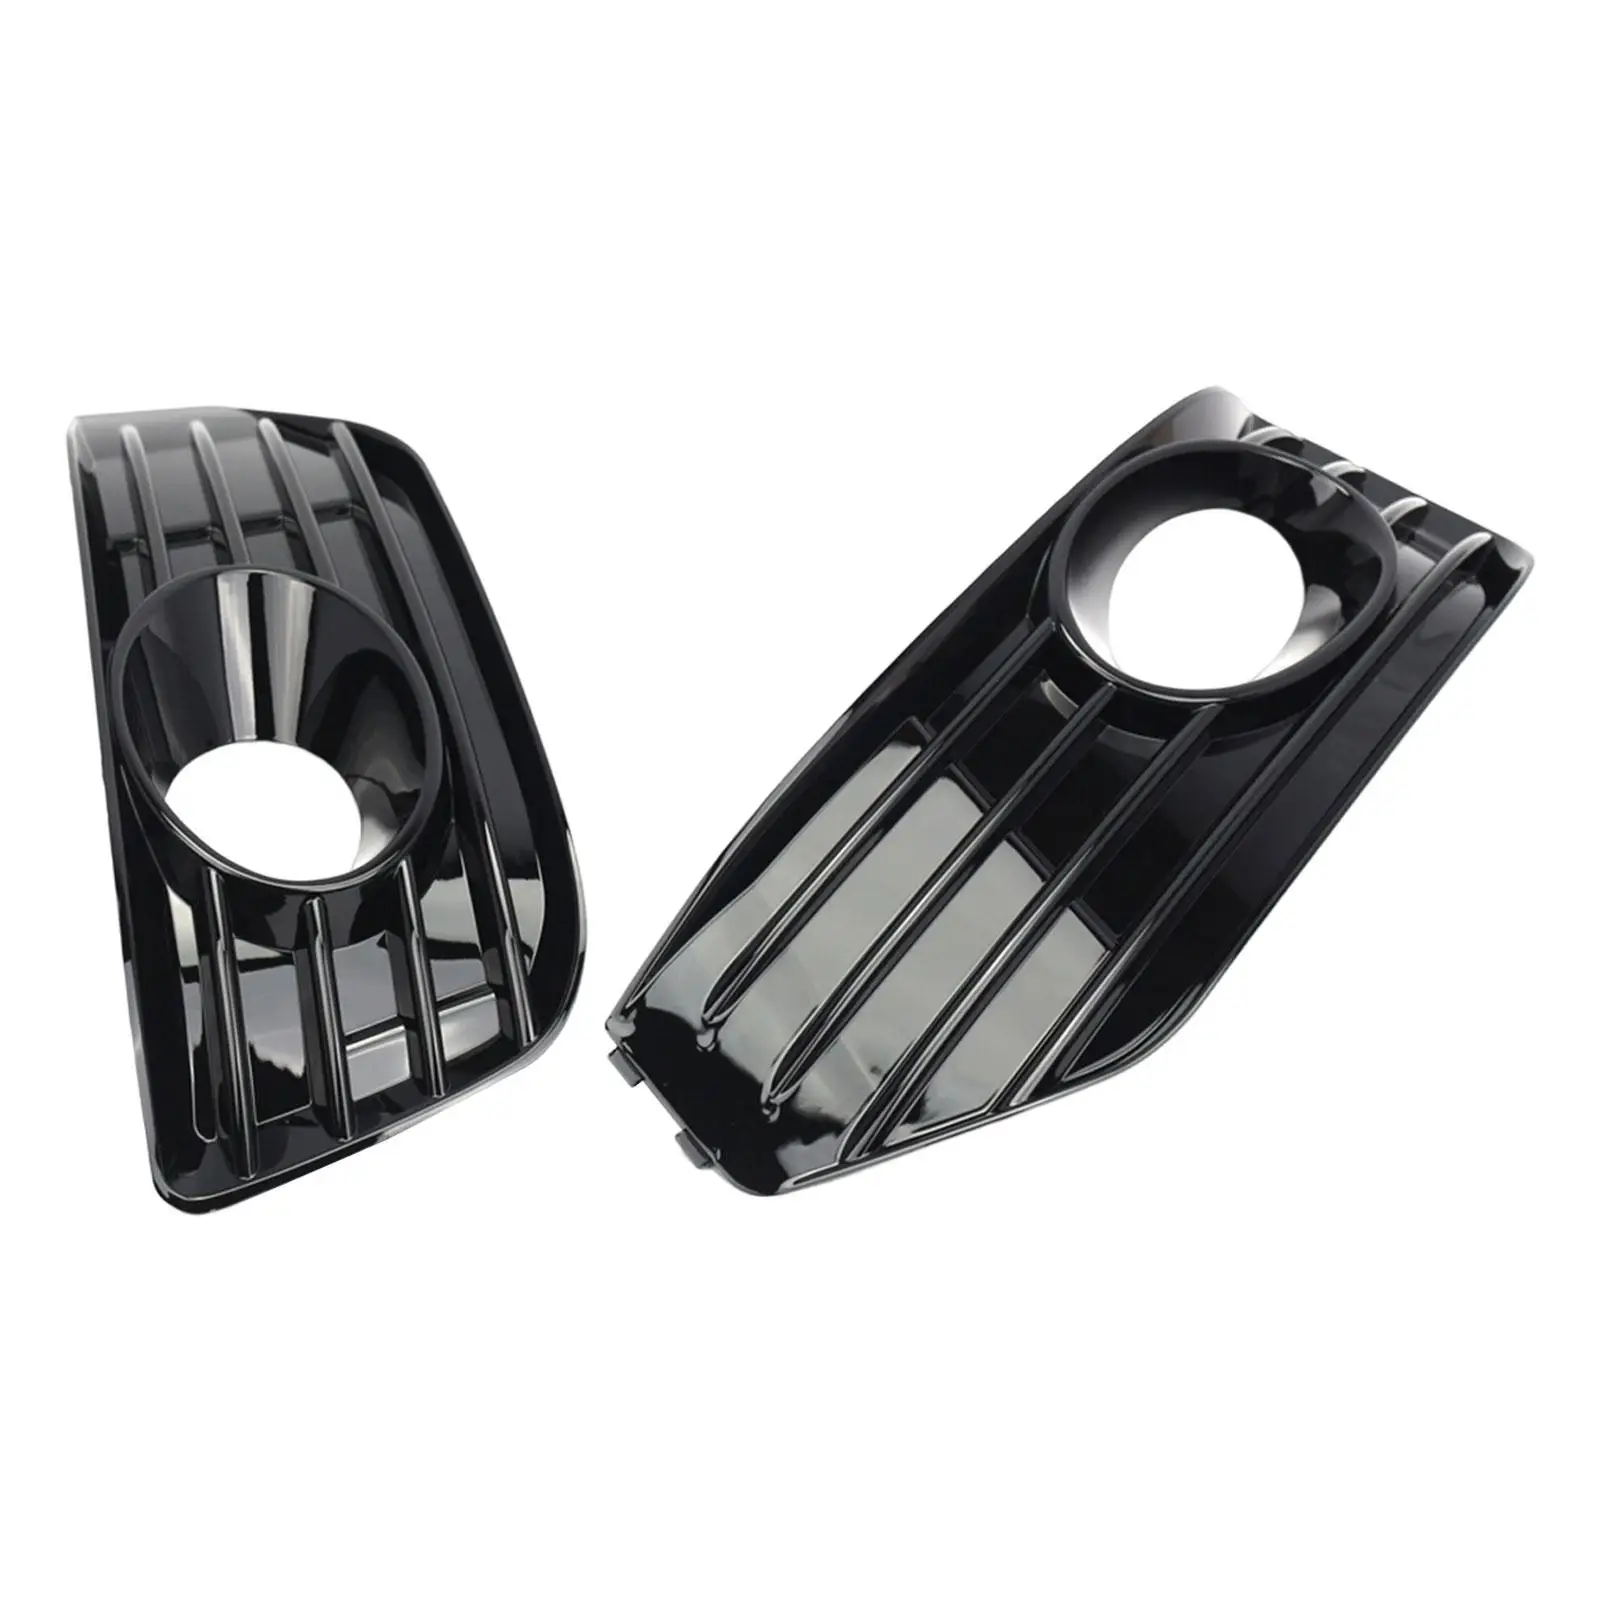 2 Pieces Fog Light Grille Lamp Covers for VW T5.1 Sportline 2010-2015